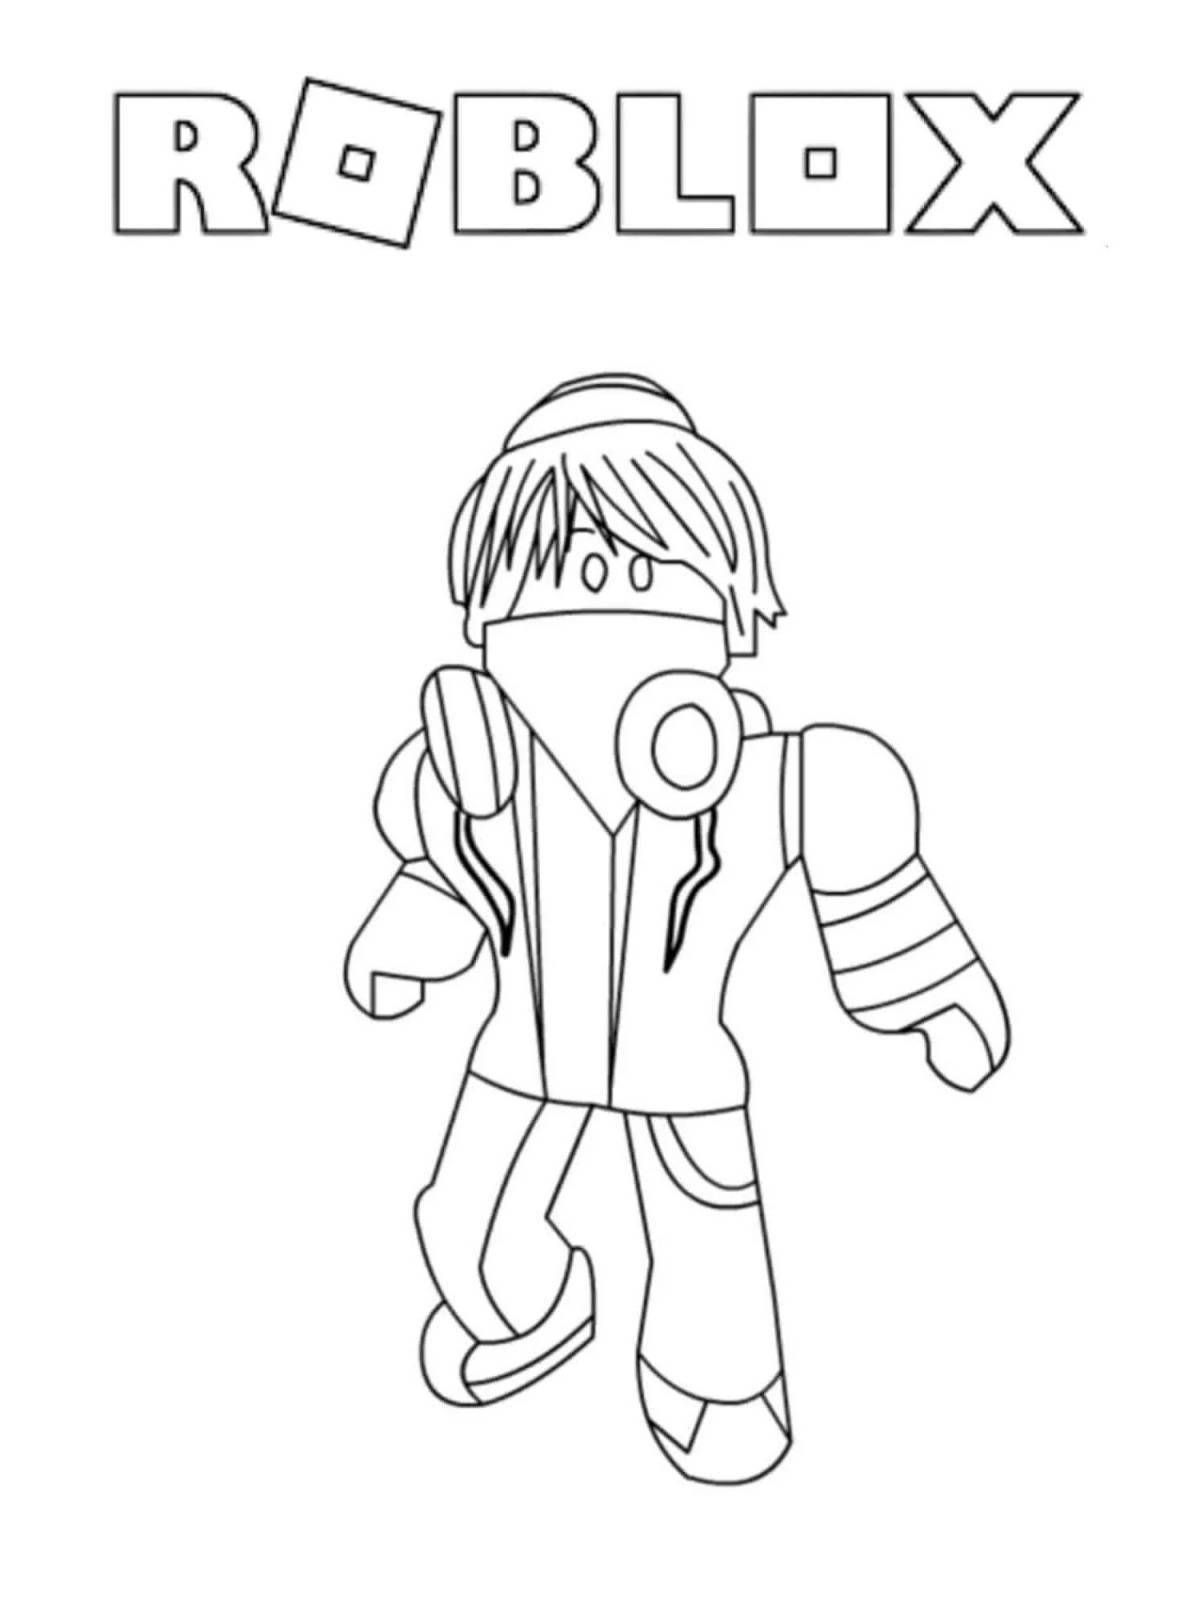 Roblox people girls colorful coloring pages